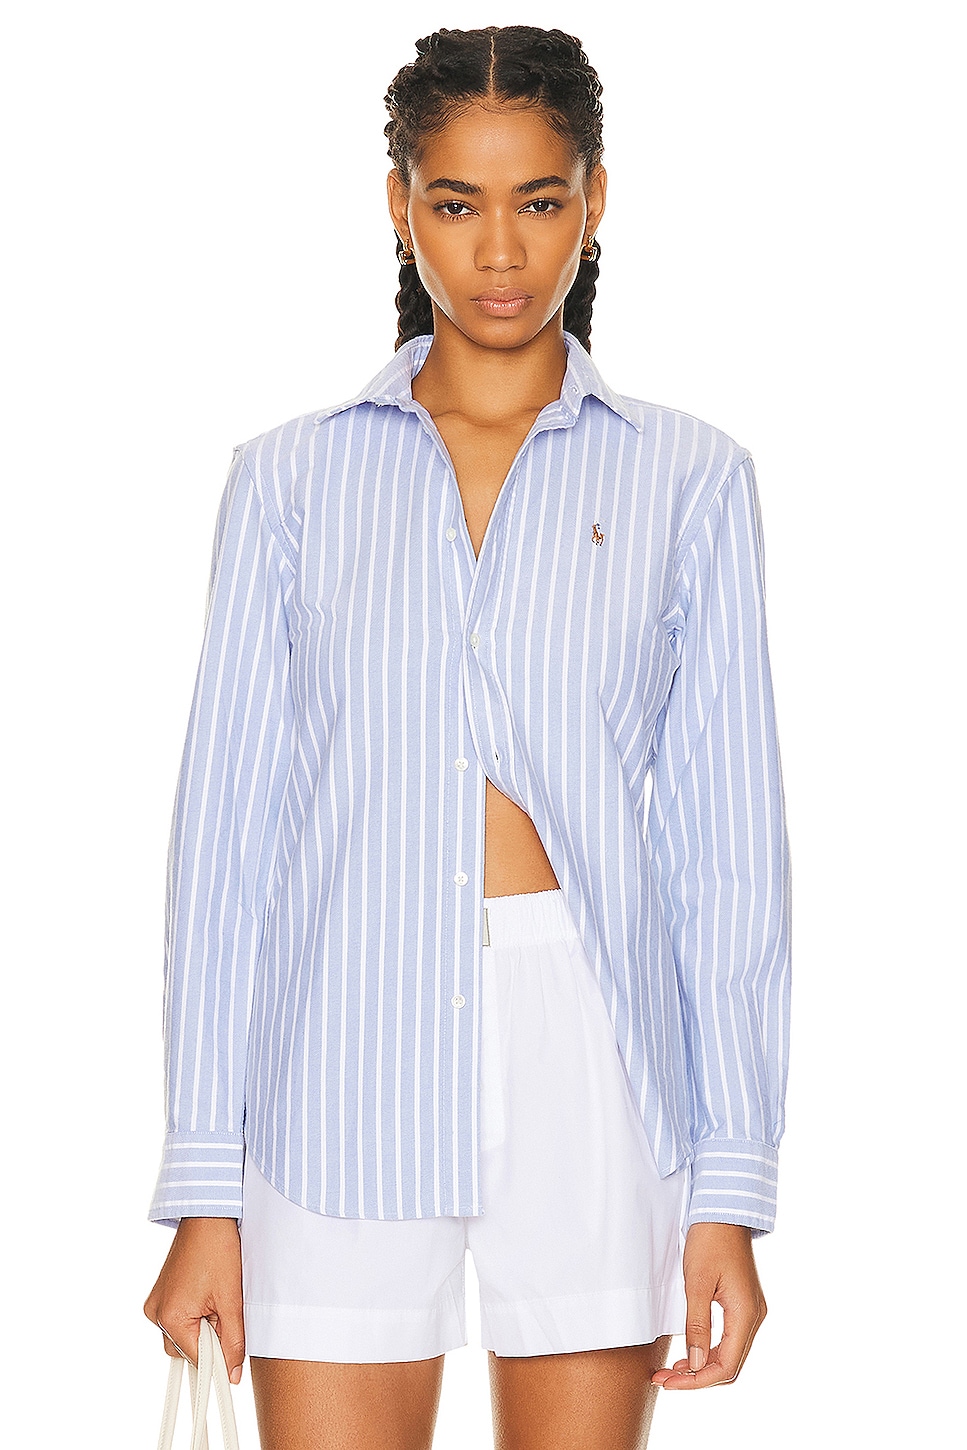 Image 1 of Polo Ralph Lauren Oxford Long Sleeve Button Up Shirt in Harbor Island Blue & White